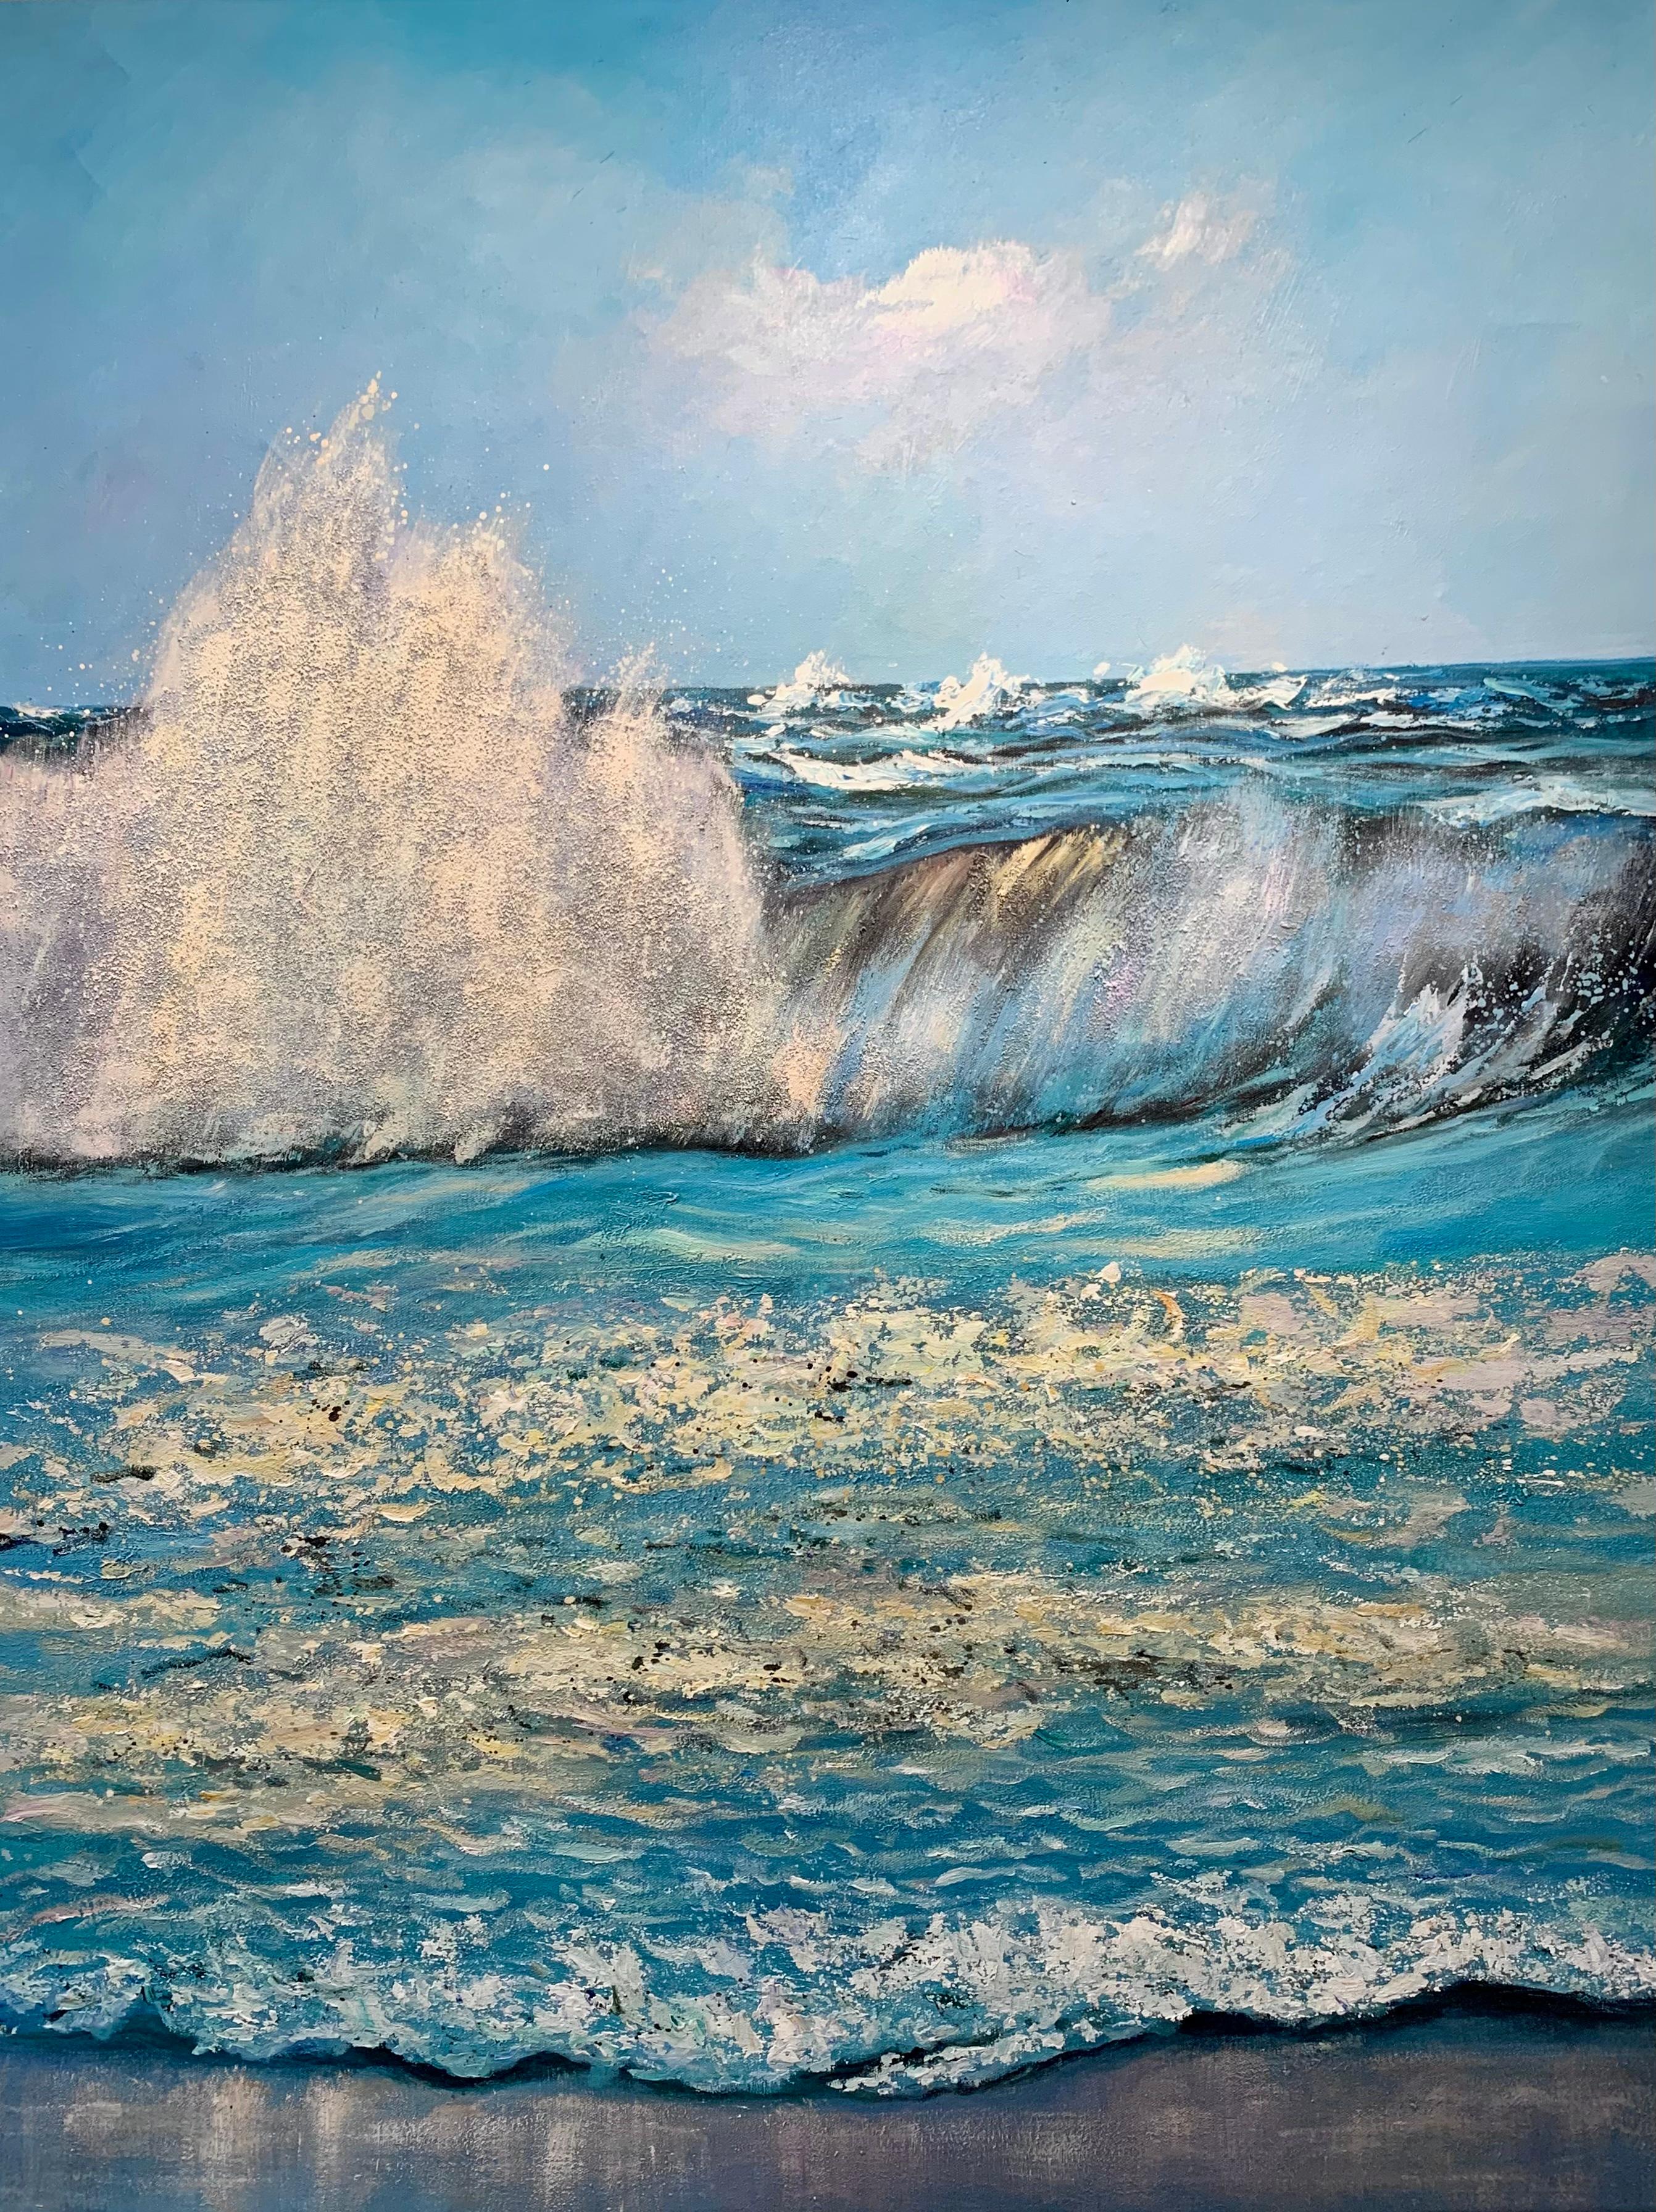 Beautiful sunset waves crashing peacefully at dusk. This contemporary landscape painting is full of vibrant blue colors and a warm sun, creating an atmospheric artwork. Reminding us of days spent on the beach.
Oil painting on canvas.